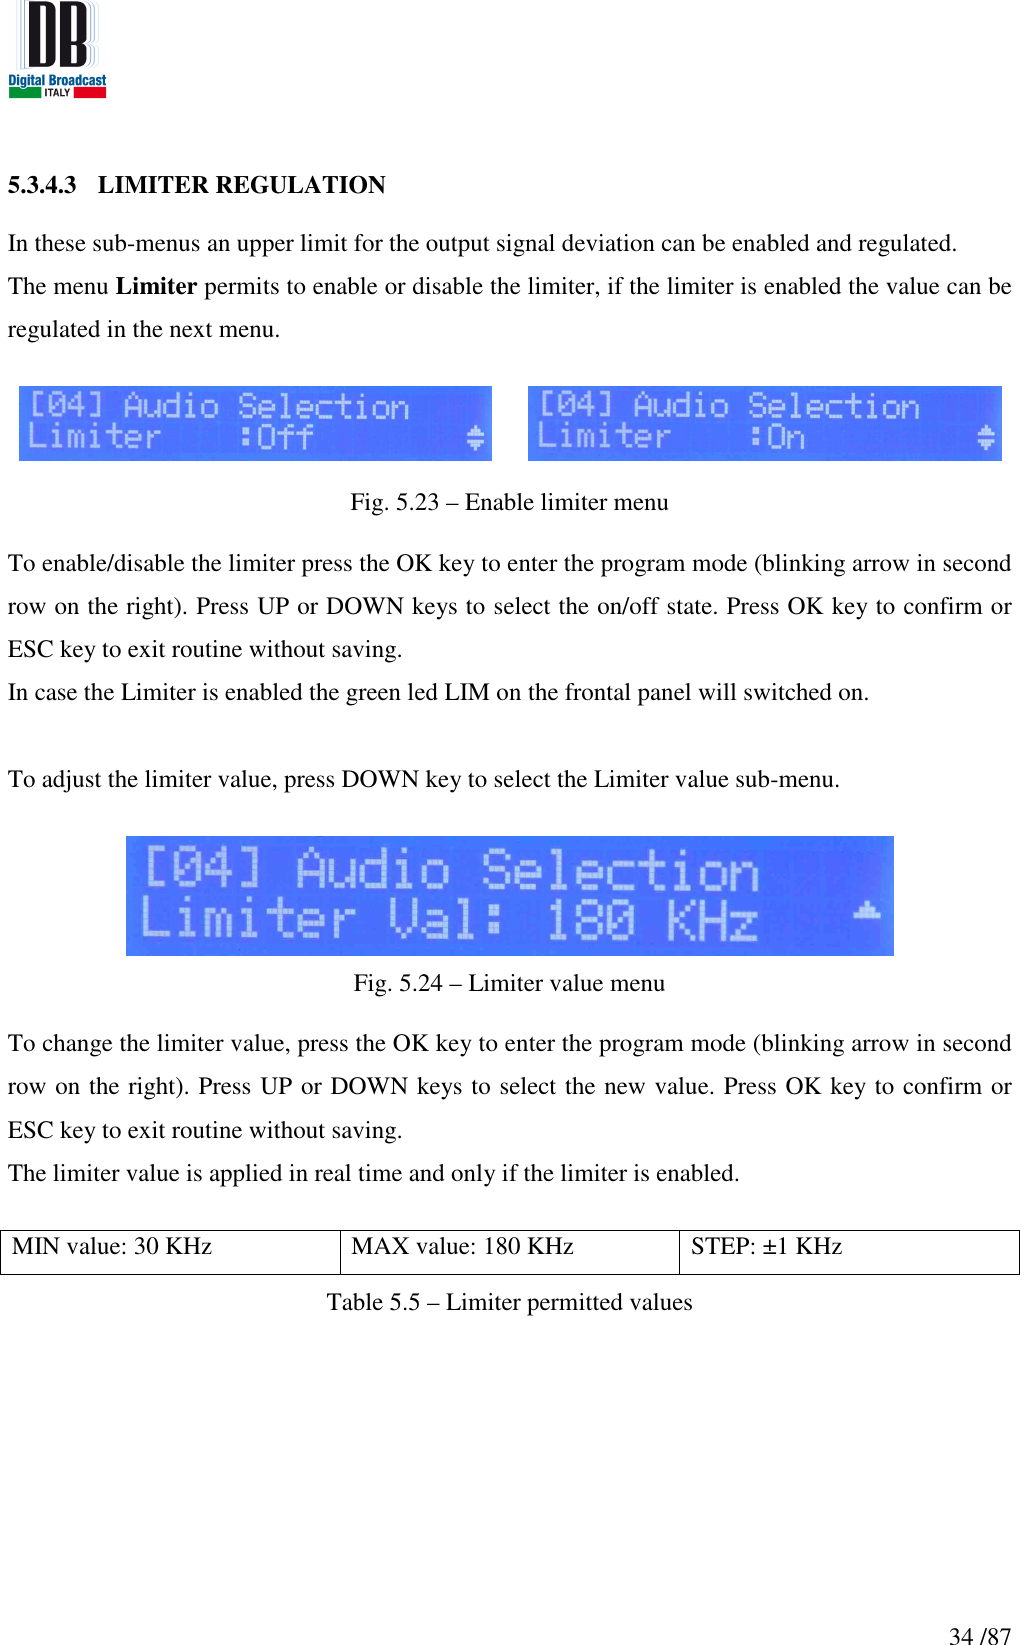   34 /87 5.3.4.3 LIMITER REGULATION  In these sub-menus an upper limit for the output signal deviation can be enabled and regulated. The menu Limiter permits to enable or disable the limiter, if the limiter is enabled the value can be regulated in the next menu.       Fig. 5.23 – Enable limiter menu  To enable/disable the limiter press the OK key to enter the program mode (blinking arrow in second row on the right). Press UP or DOWN keys to select the on/off state. Press OK key to confirm or ESC key to exit routine without saving.  In case the Limiter is enabled the green led LIM on the frontal panel will switched on.  To adjust the limiter value, press DOWN key to select the Limiter value sub-menu.   Fig. 5.24 – Limiter value menu  To change the limiter value, press the OK key to enter the program mode (blinking arrow in second row on the right). Press UP or DOWN keys to select the new value. Press OK key to confirm or ESC key to exit routine without saving.  The limiter value is applied in real time and only if the limiter is enabled.  MIN value: 30 KHz  MAX value: 180 KHz  STEP: ±1 KHz Table 5.5 – Limiter permitted values    